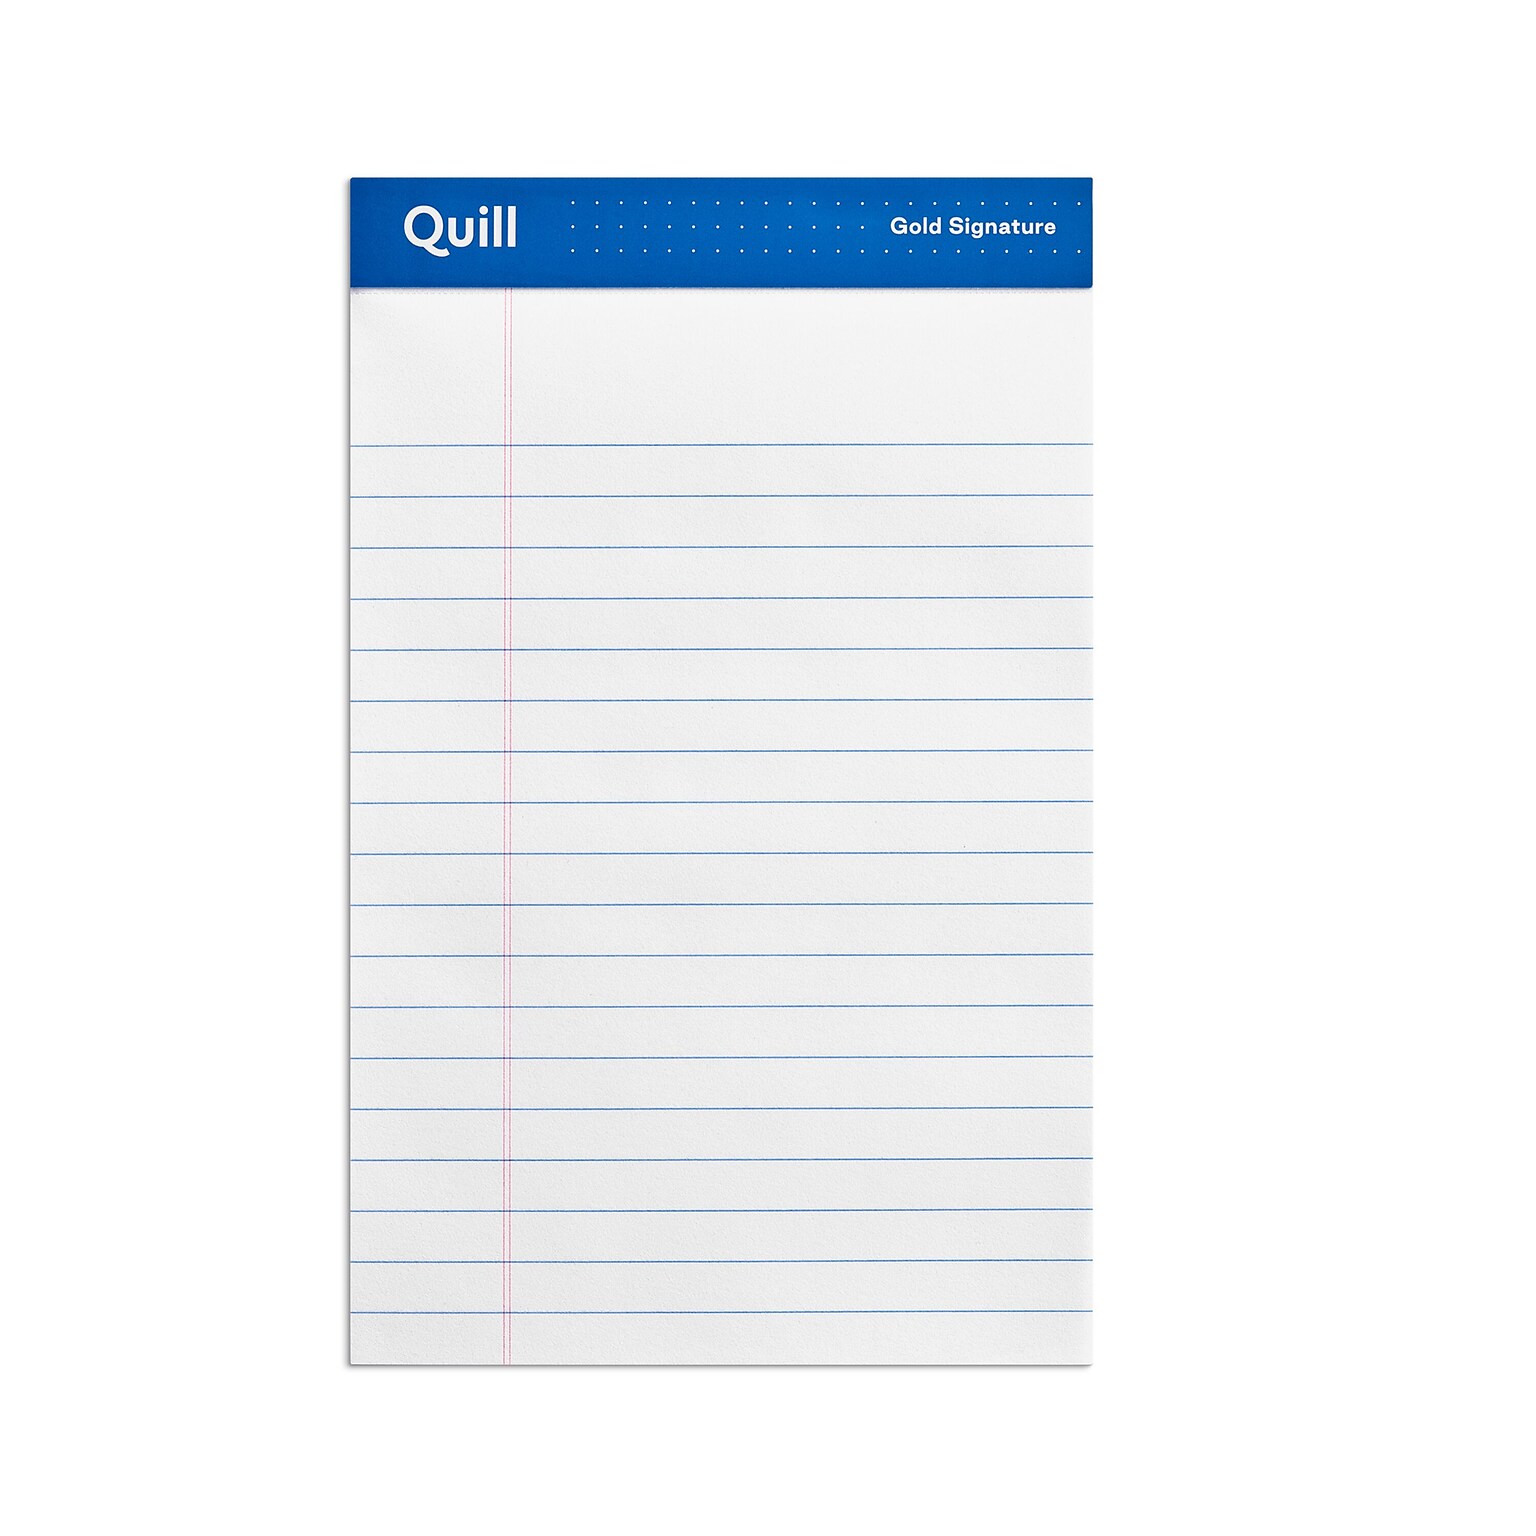 Quill Brand® Gold Signature Premium Series Legal Pad, 5 x 8, Legal Ruled, White, 50 Sheets/Pad, 12 Pads/Pack (742316)